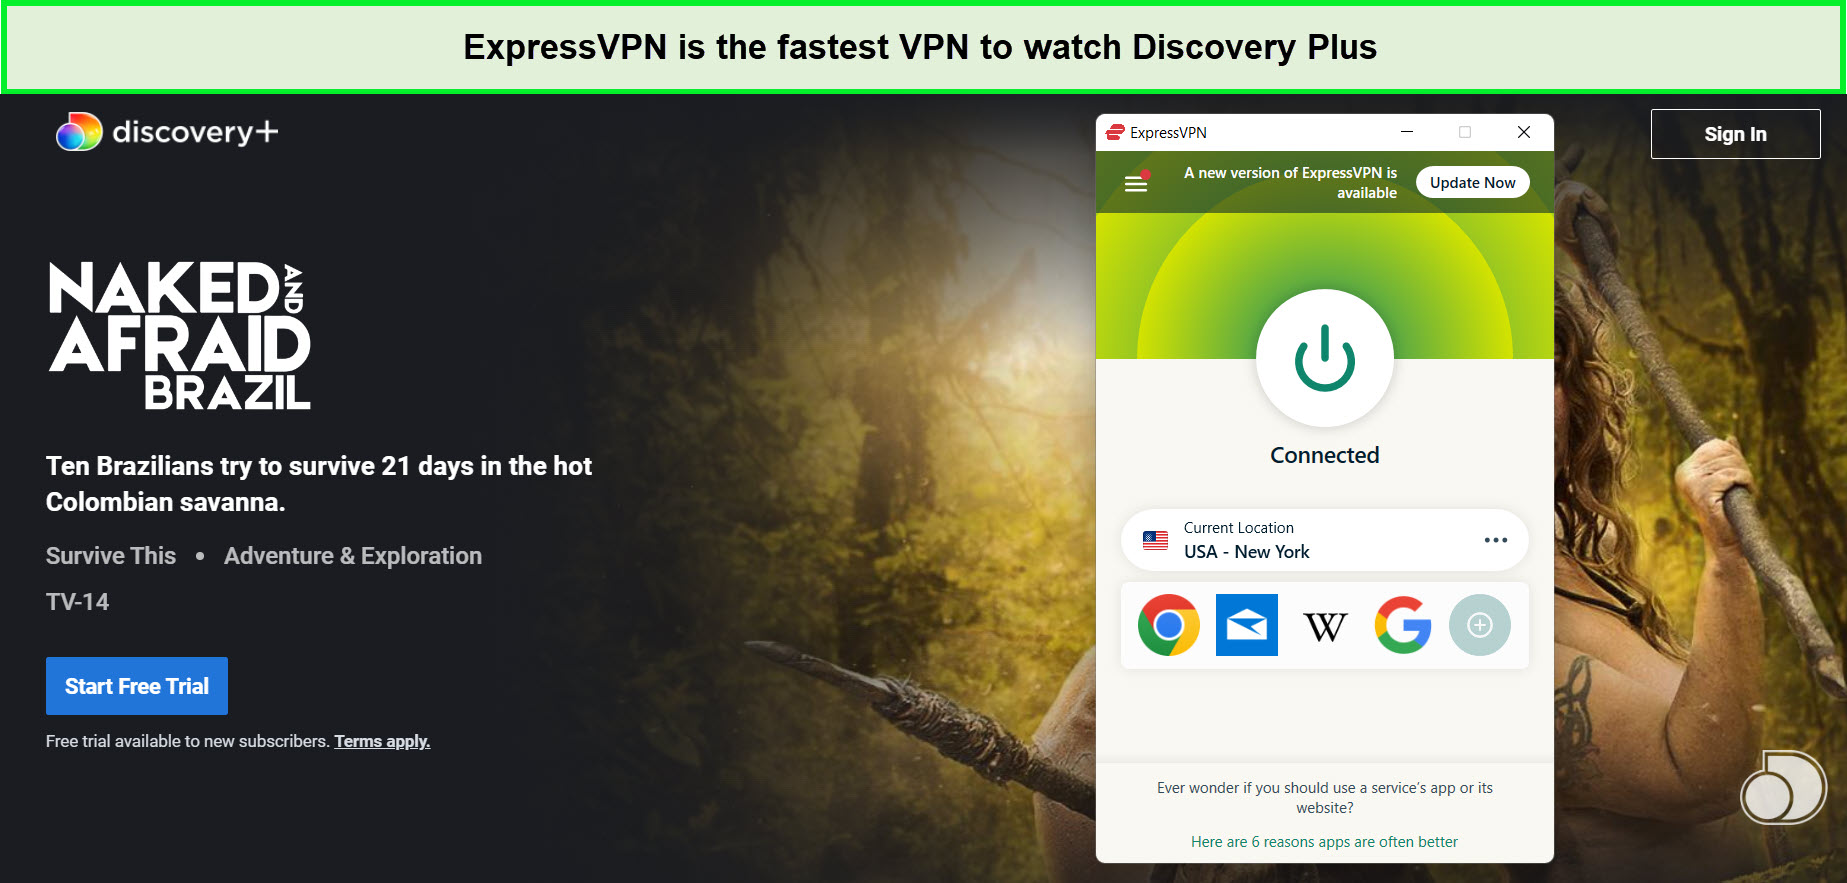 expressvpn-is-the-best-vpn-to-watch-naked-and-afraid-brazil-season-16-on-discovery-plus-in-canada